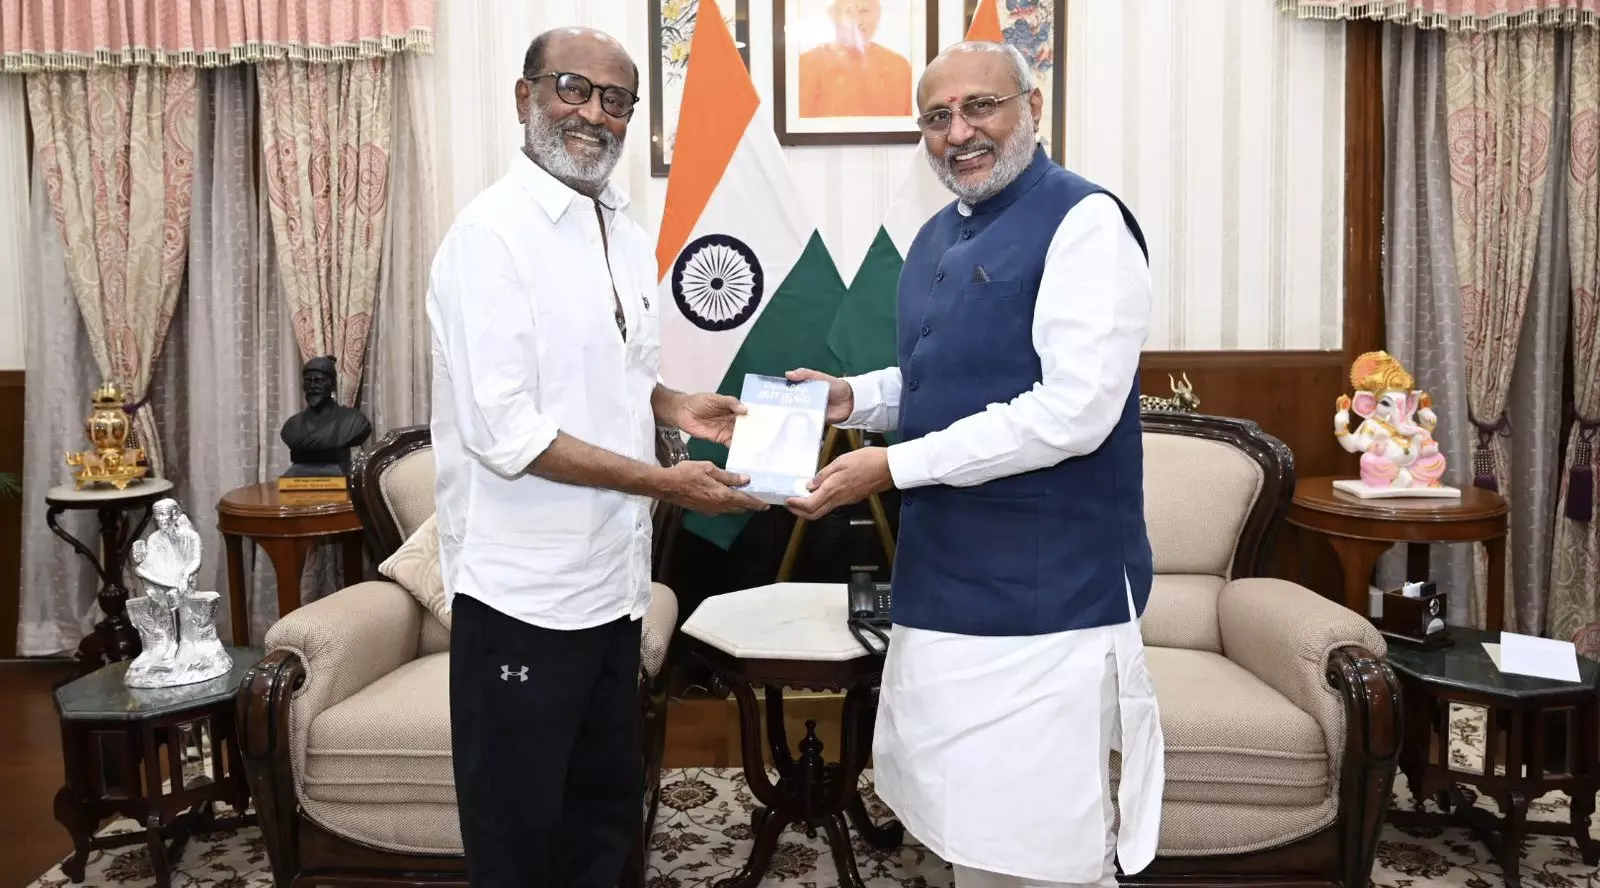 Jharkhand governor meets Rajinikanth, calls him one of Indias greatest actors